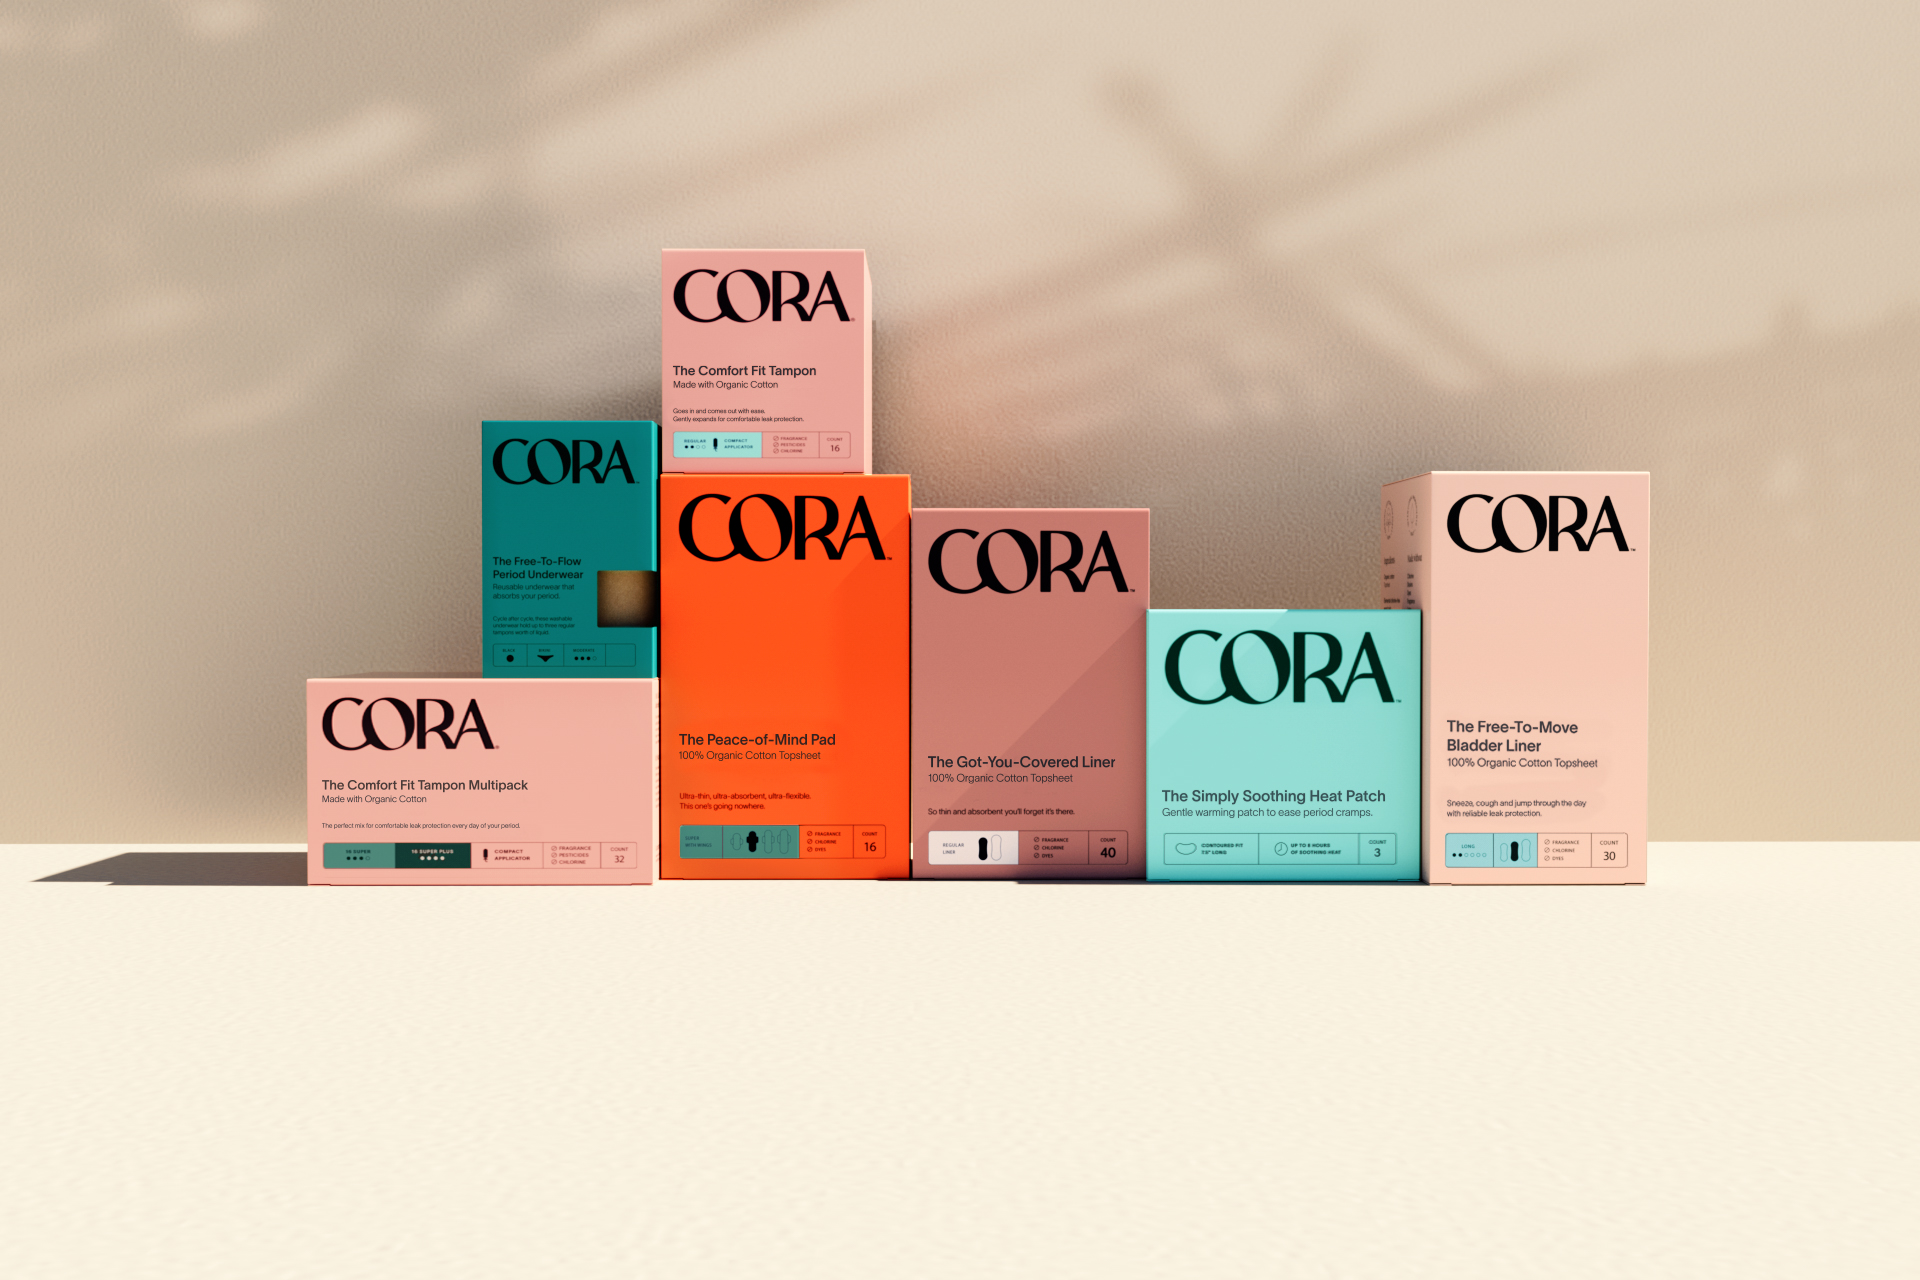 Cora Launches Inclusive and Emotionally Relevant New Identity by Mother Design